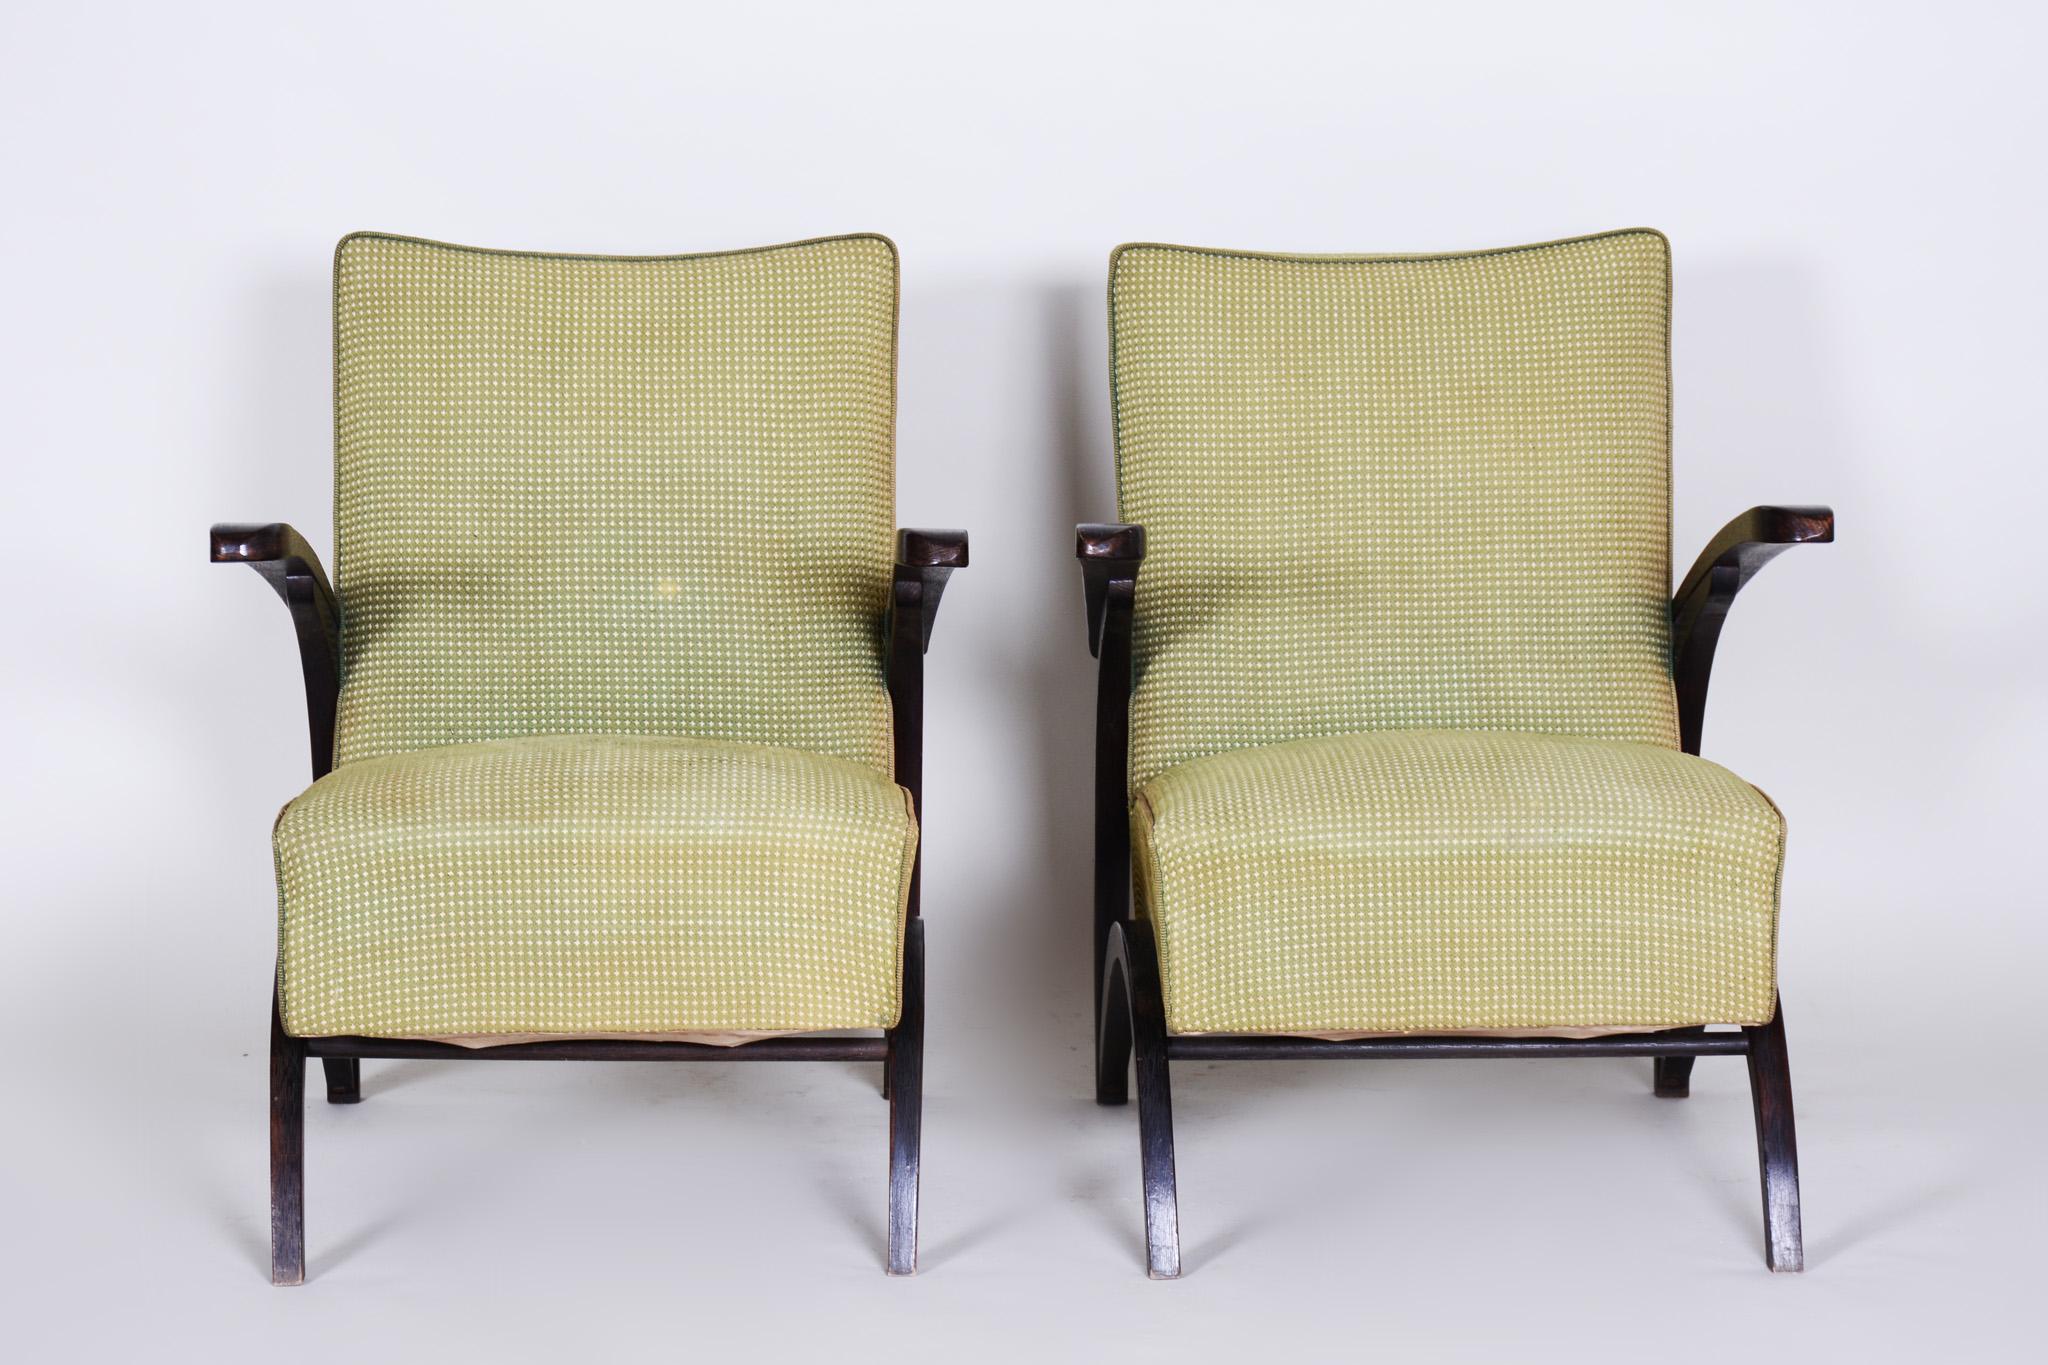 Pair of Art Deco armchairs.
United Arts & Crafts manufacture. Designed by Jindrich Halabala.
Original pollish, upholstery and fabric
Very well preserved.